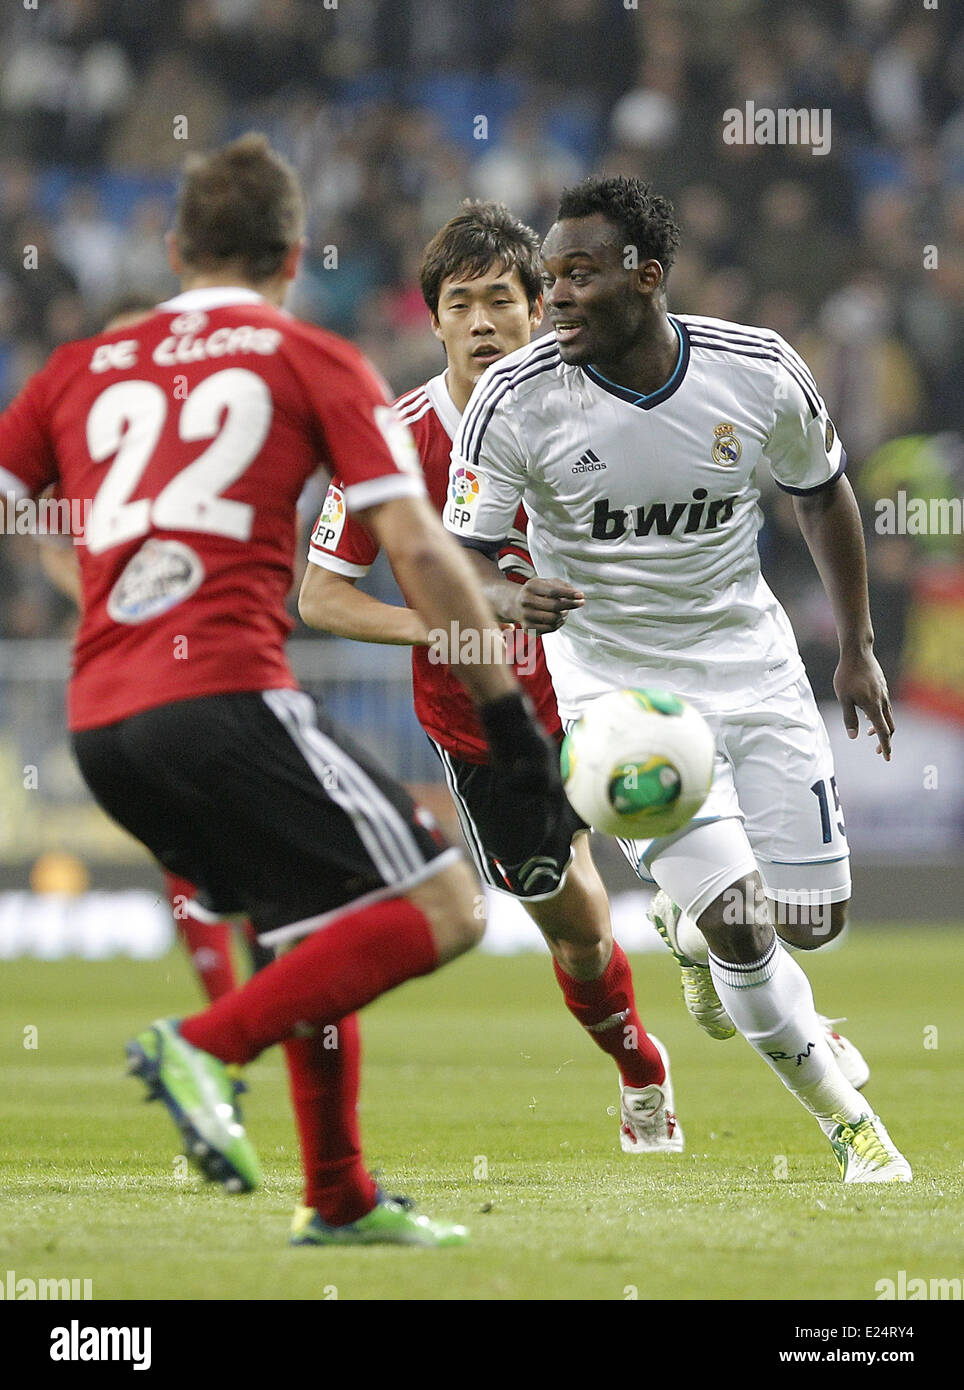 Spanish Kings Cup match between Real Madrid and Celta Vigo, Real lead Celta 5-2 in the first leg  Featuring: Michael Essien Where: KDN, Spain When: 09 Jan 2013 Stock Photo